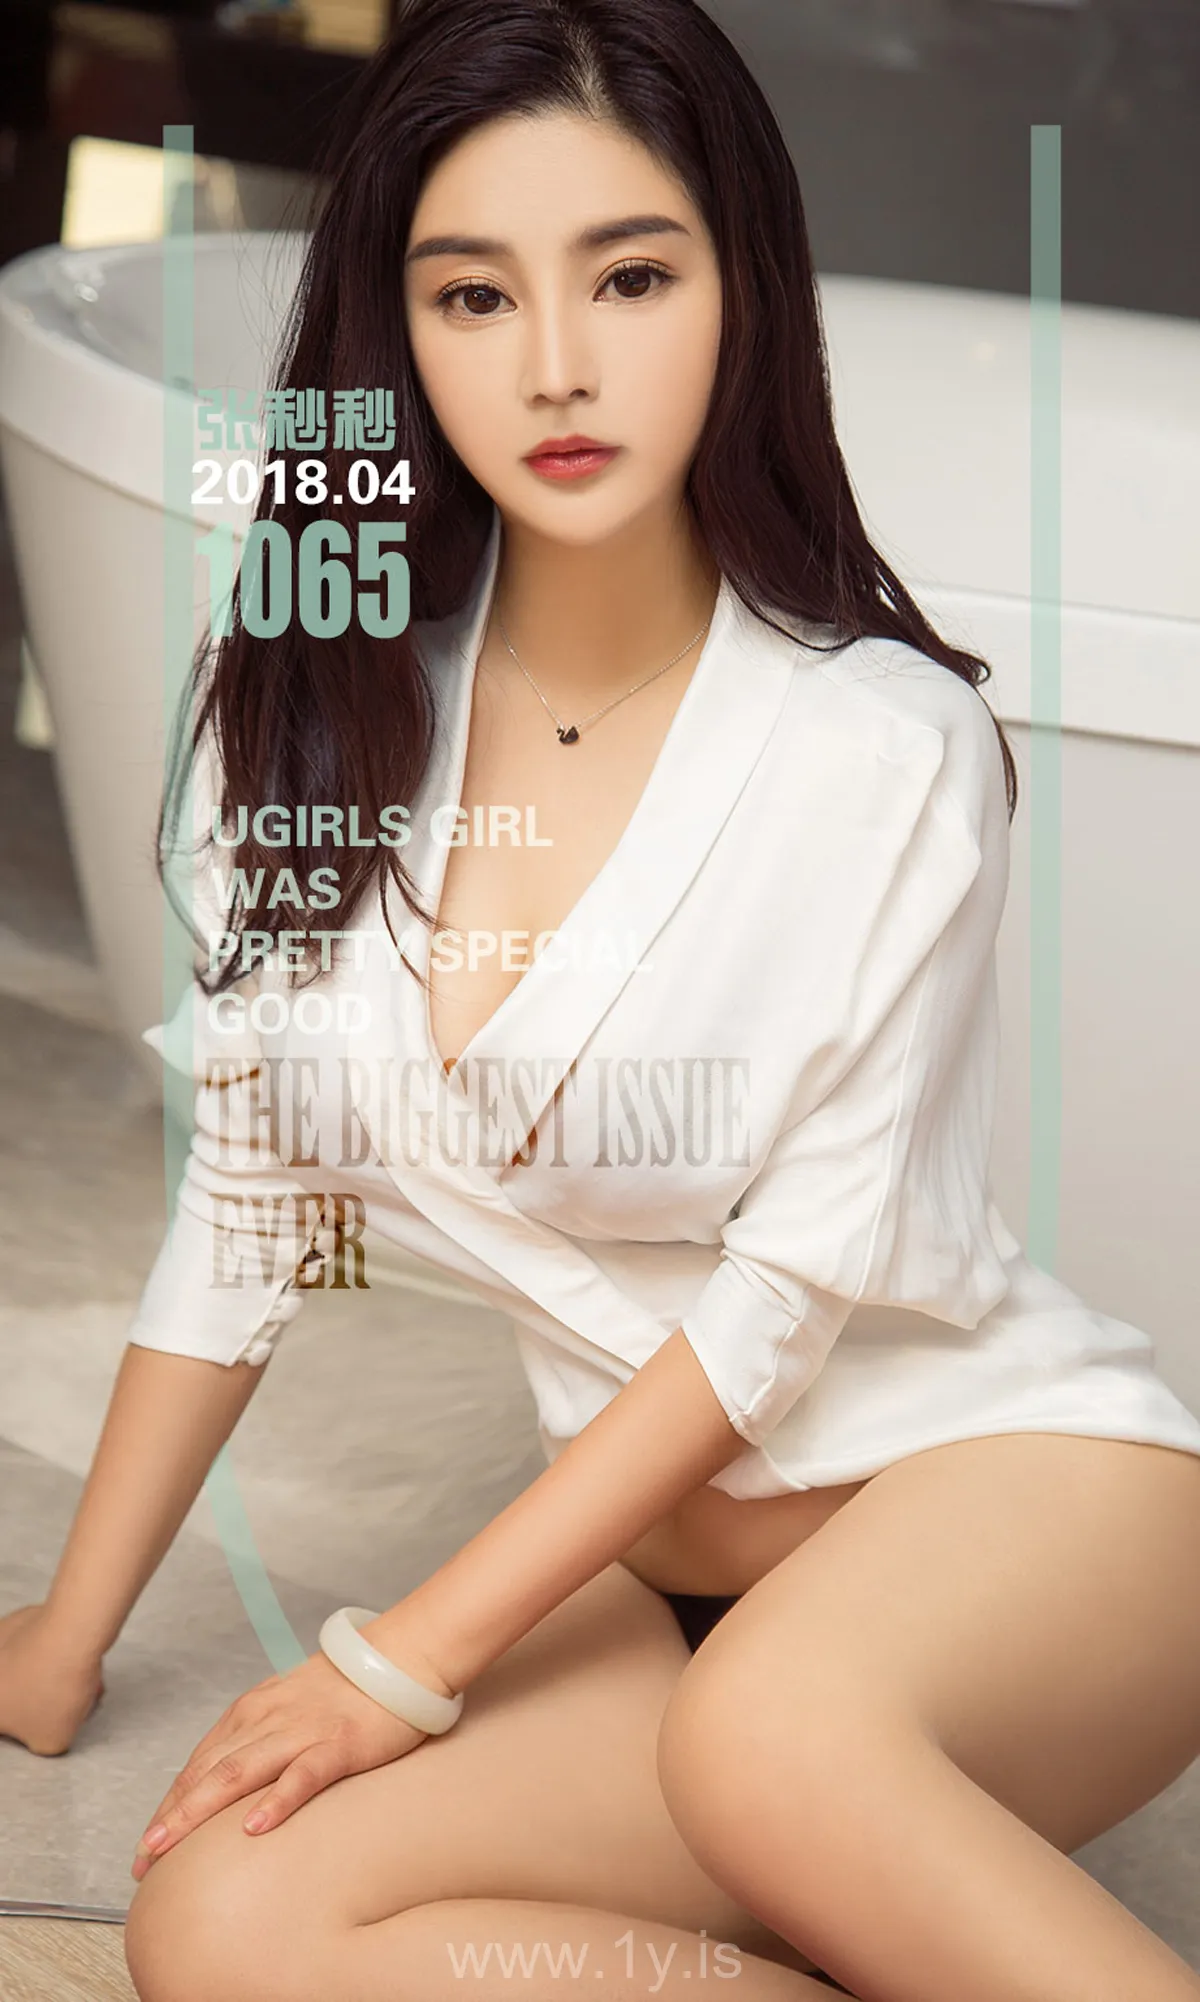 UGIRLS NO.1065 Sexy & Well Done Chinese Belle 张秒秒